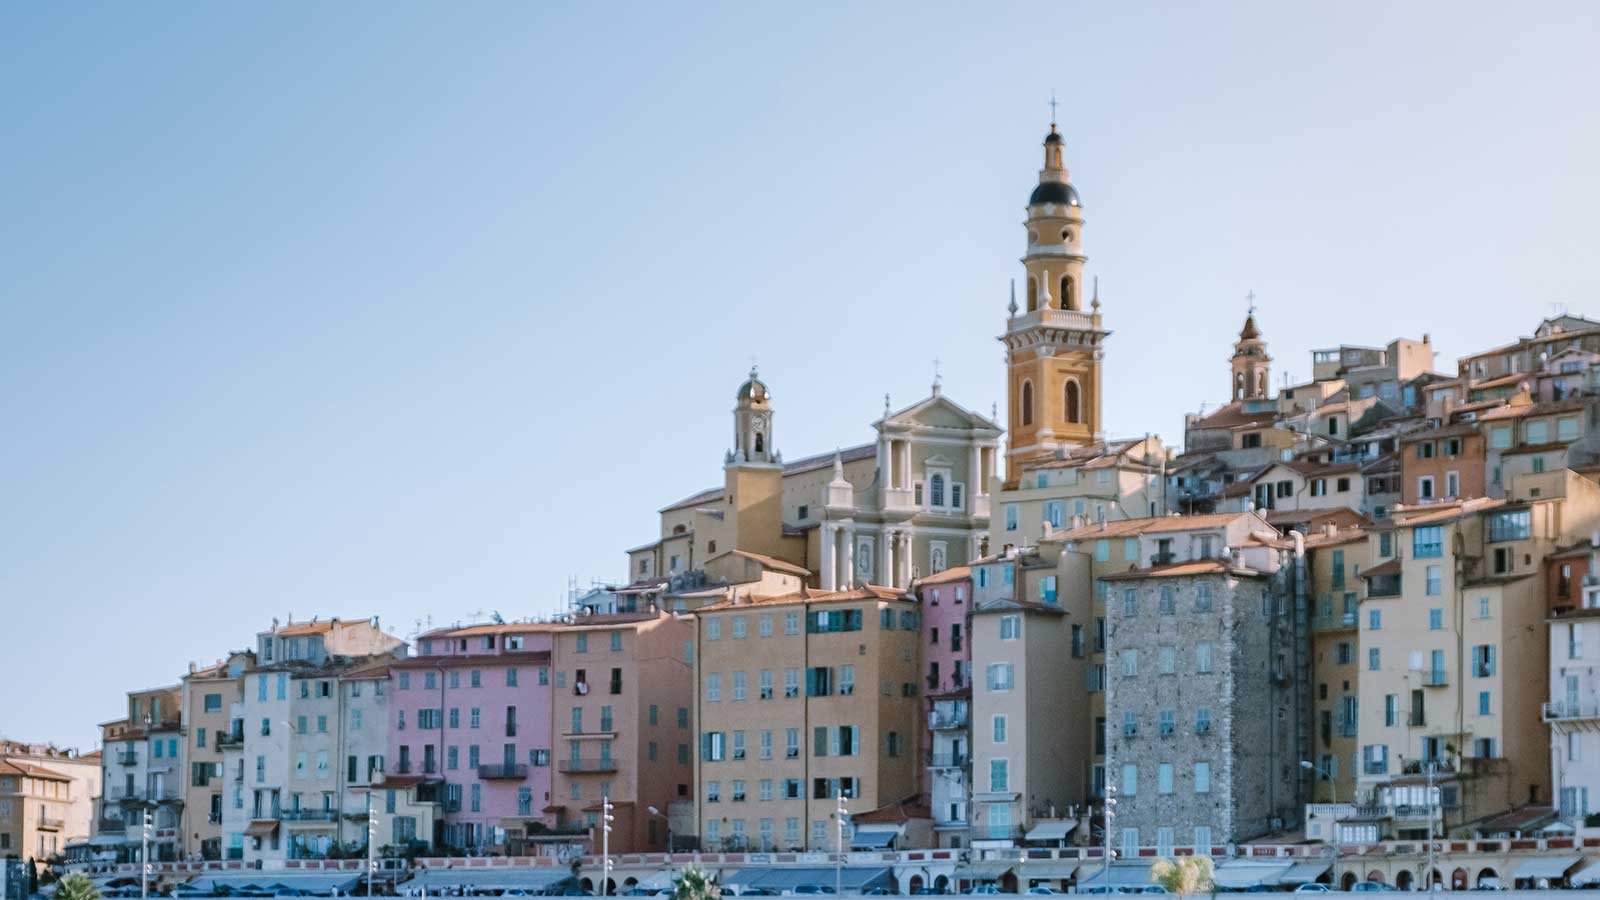 The colourful town of Menton